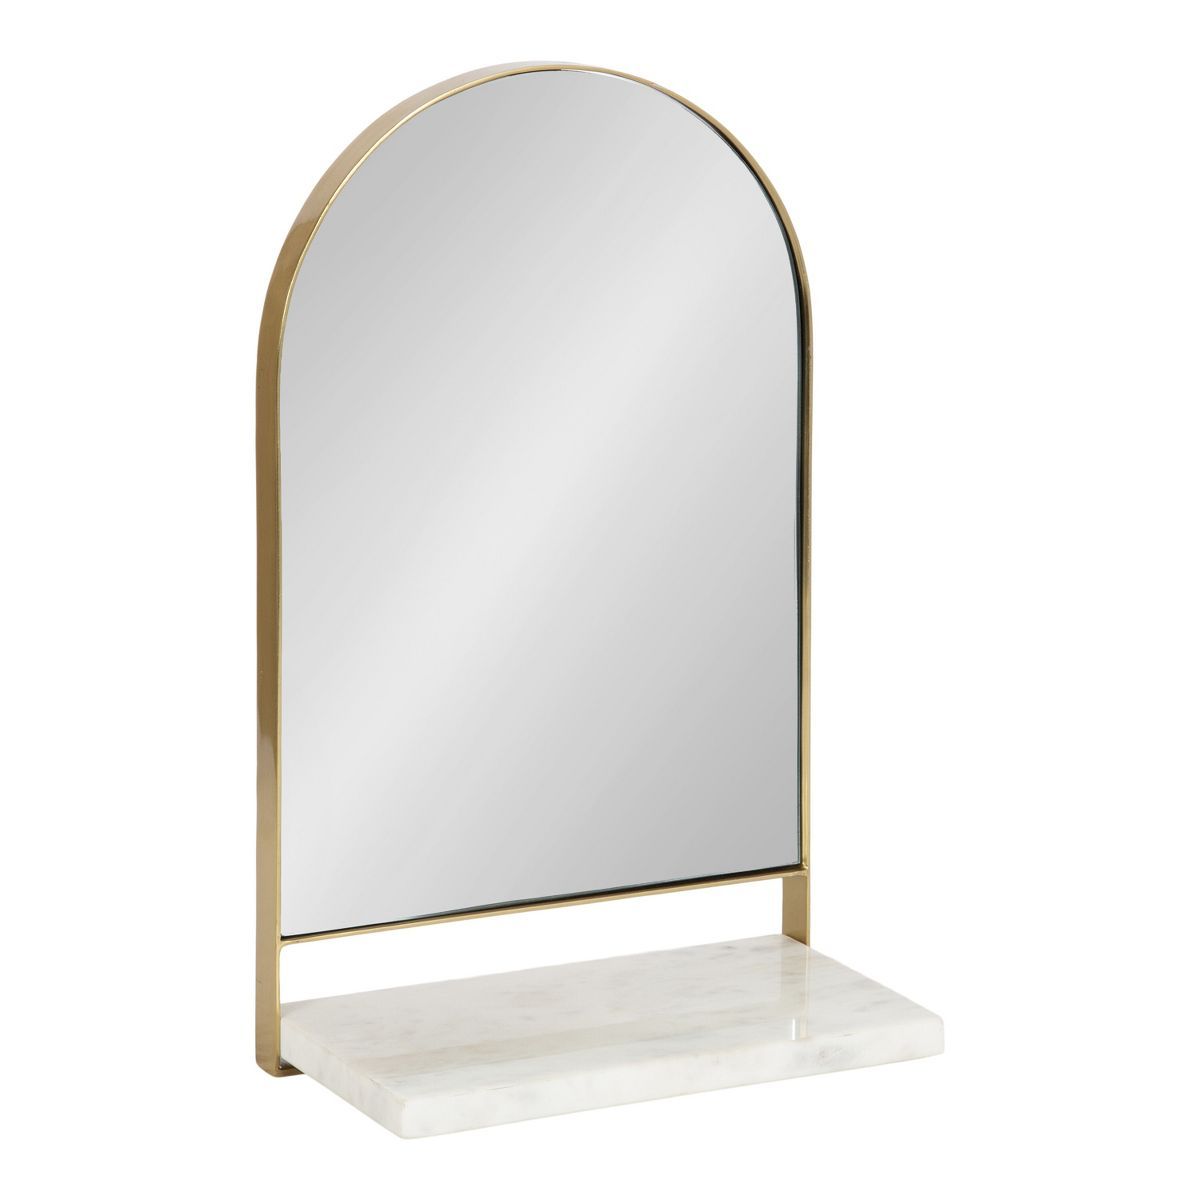 12"x20" Chadwin Arch Wall Mirror with Shelf Gold - Kate & Laurel All Things Decor | Target